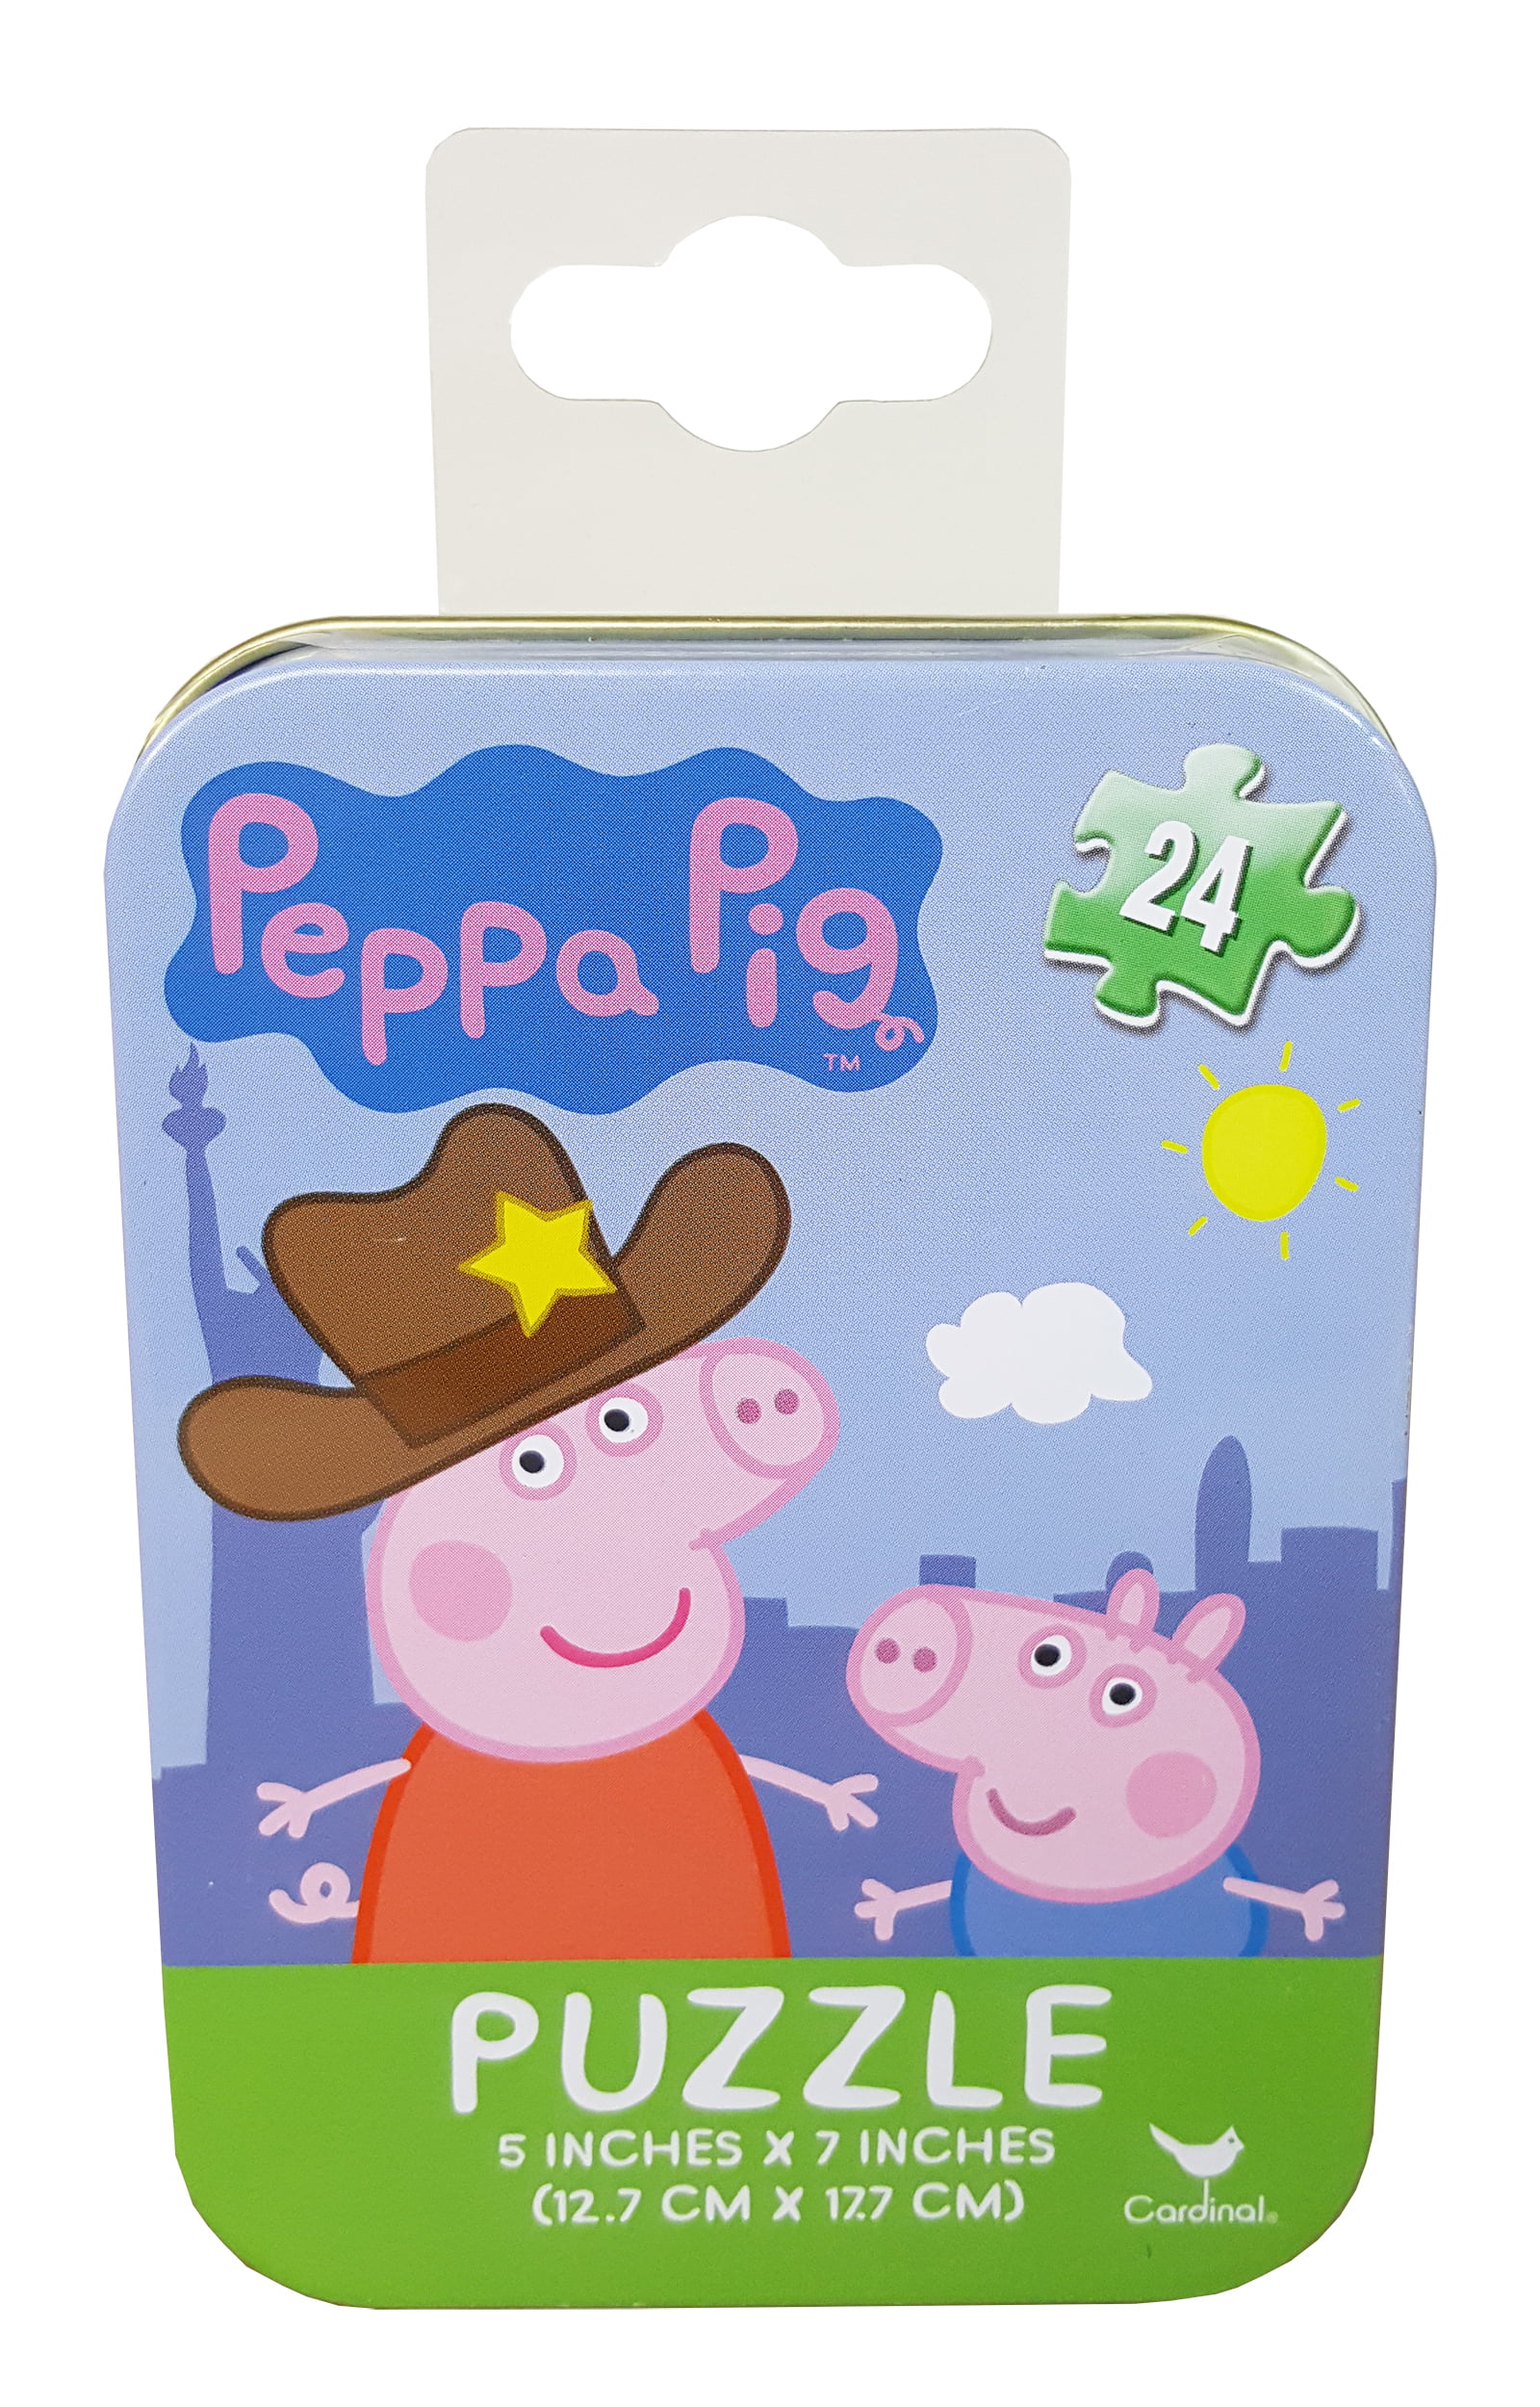 24 Pieces NEW Ages 5 PEPPA PIG 5" x 7" Jigsaw Puzzle In Collector’s Tin 